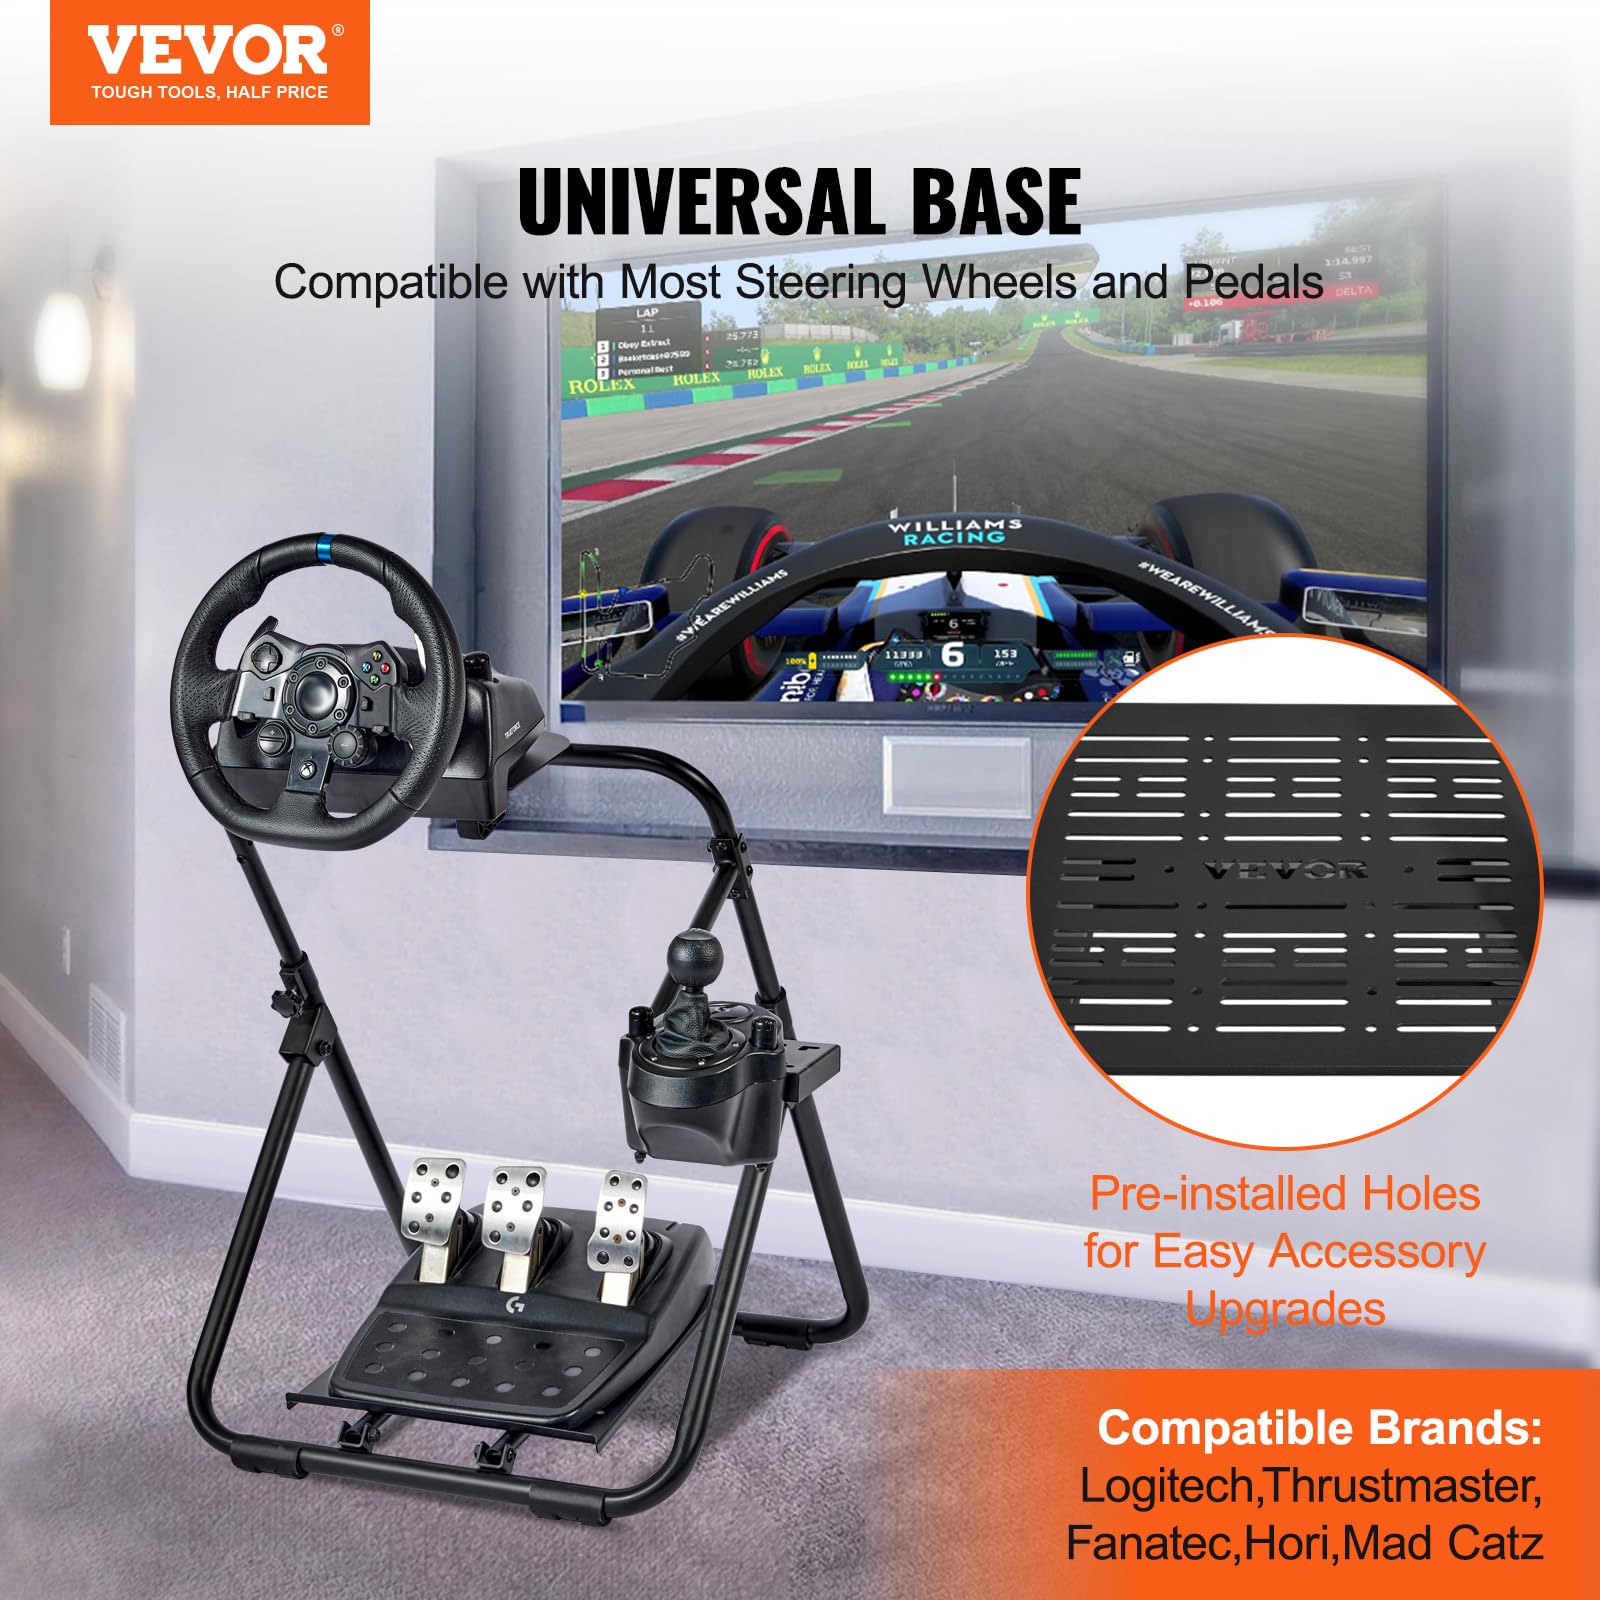 VEVOR Foldable Racing Steering Wheel Stand, Height Adjustable Universal Base Compatible with Logitech & Thrustmaster Racing Wheel and Pedal, Heavy-duty Frame Standard GT/Formula Seating Portable